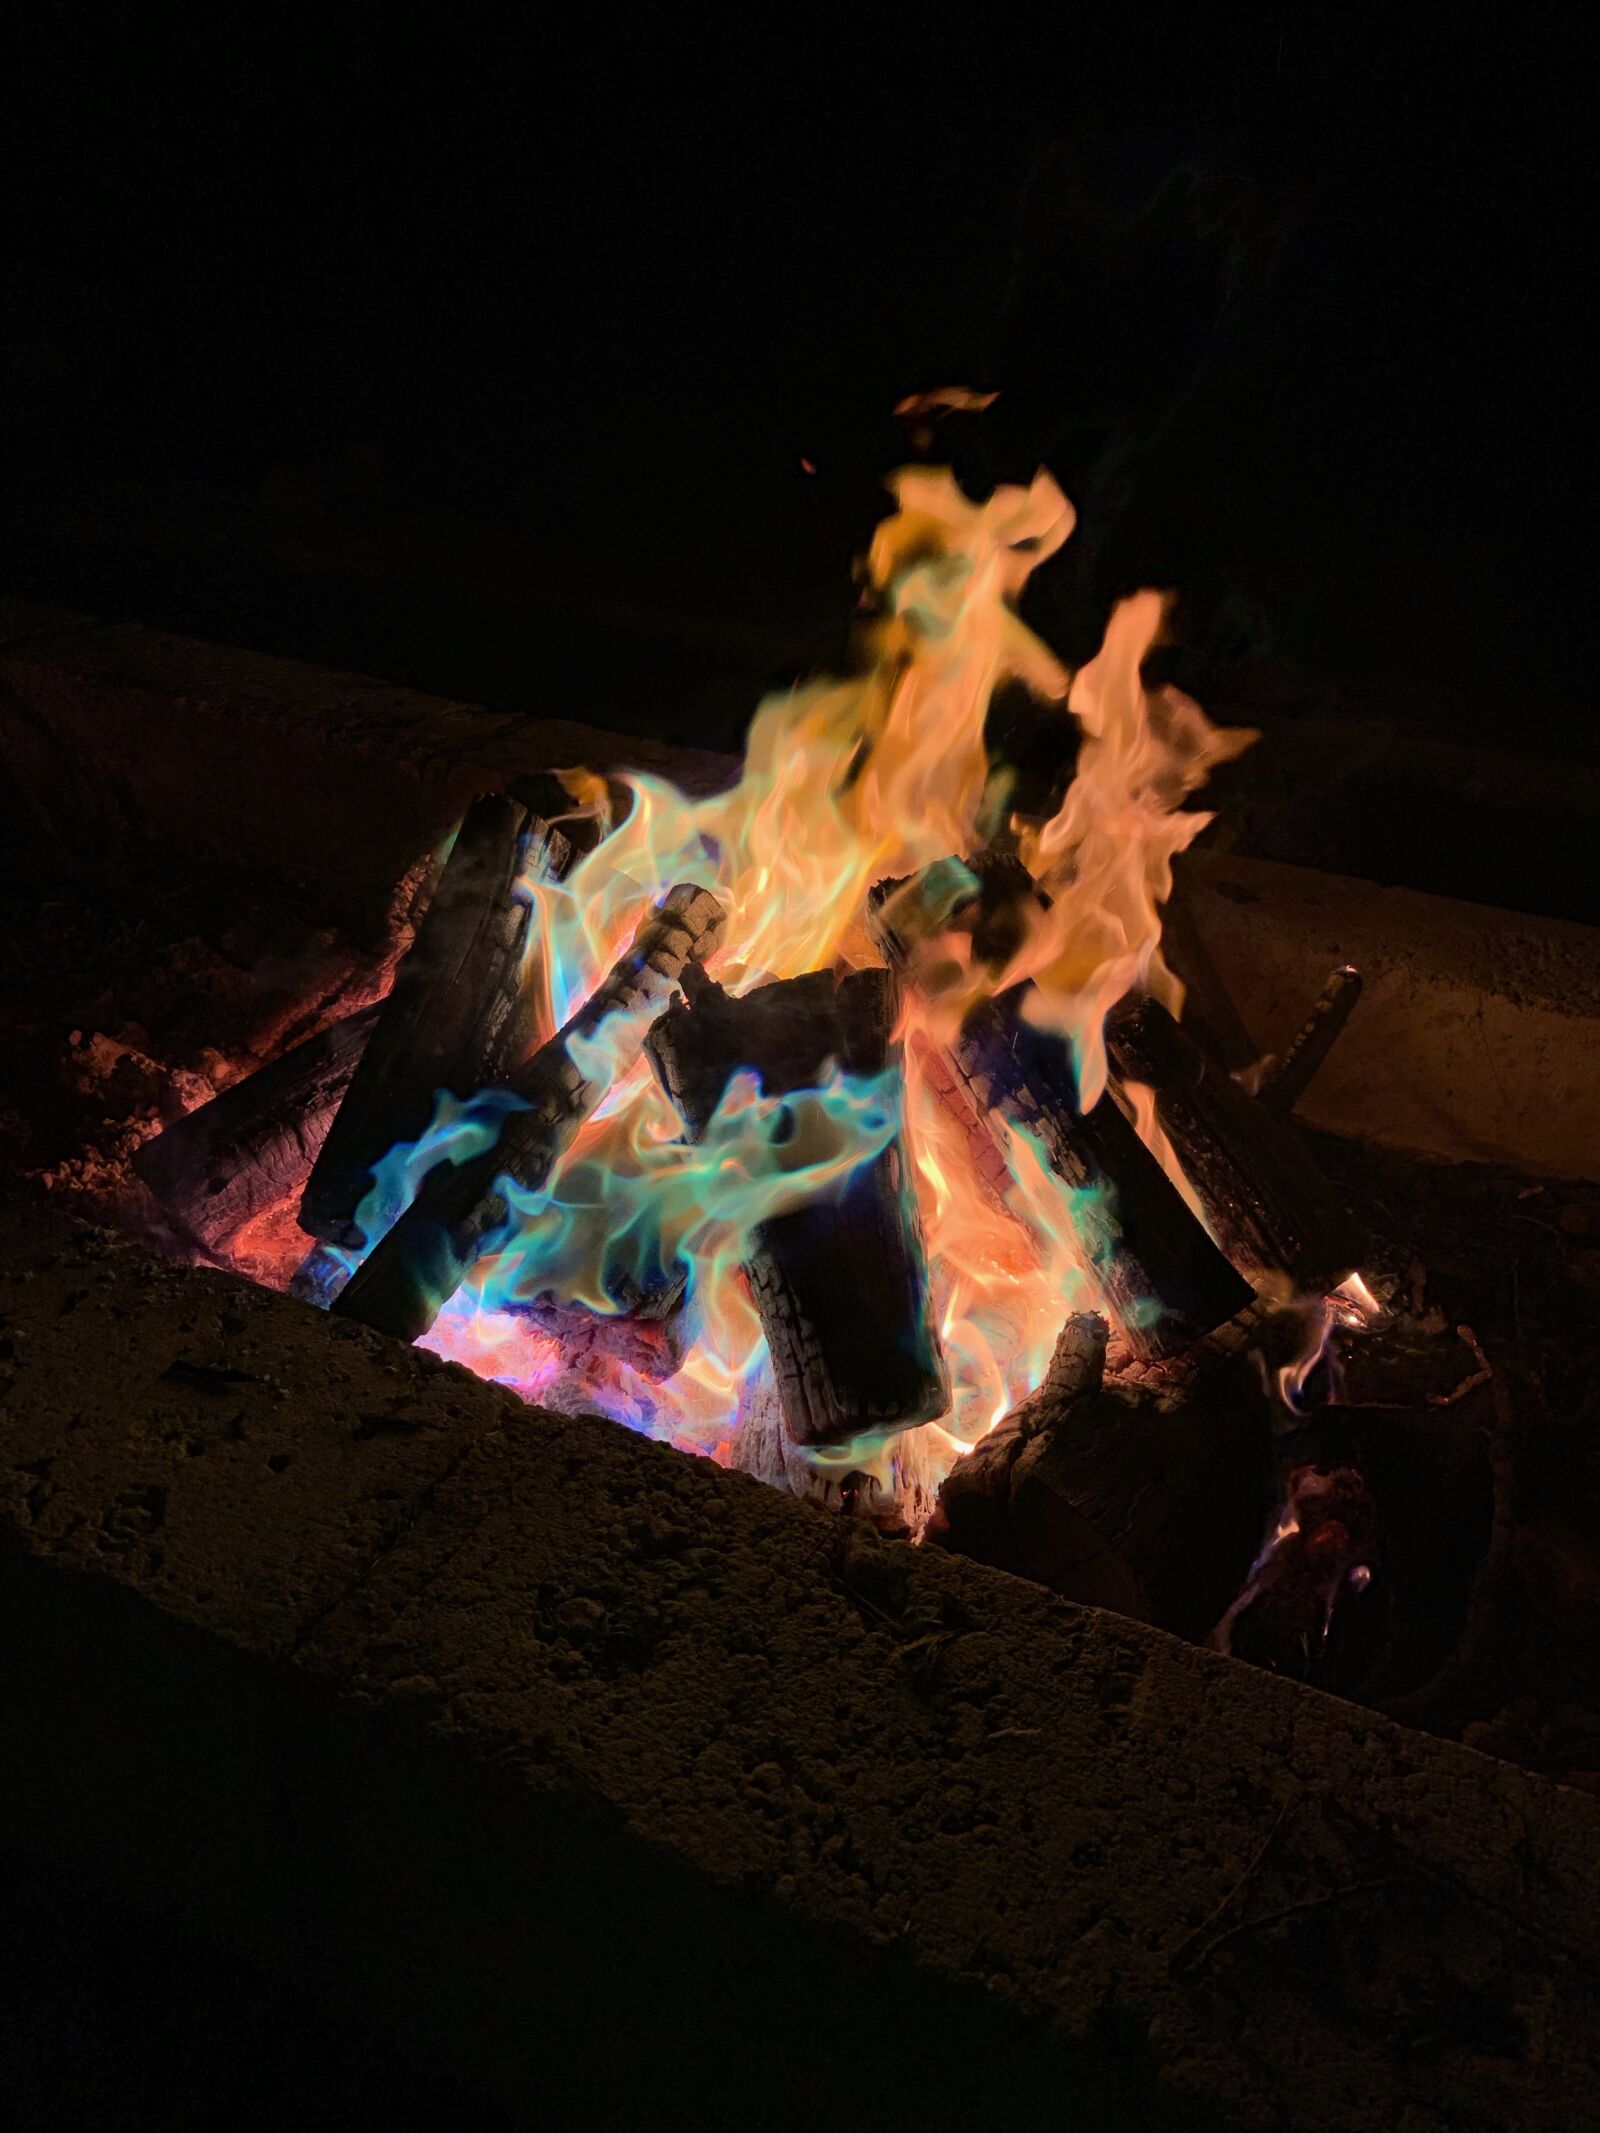 Apple iPhone XS Max sample photo. Colour fire, flame, fire photography